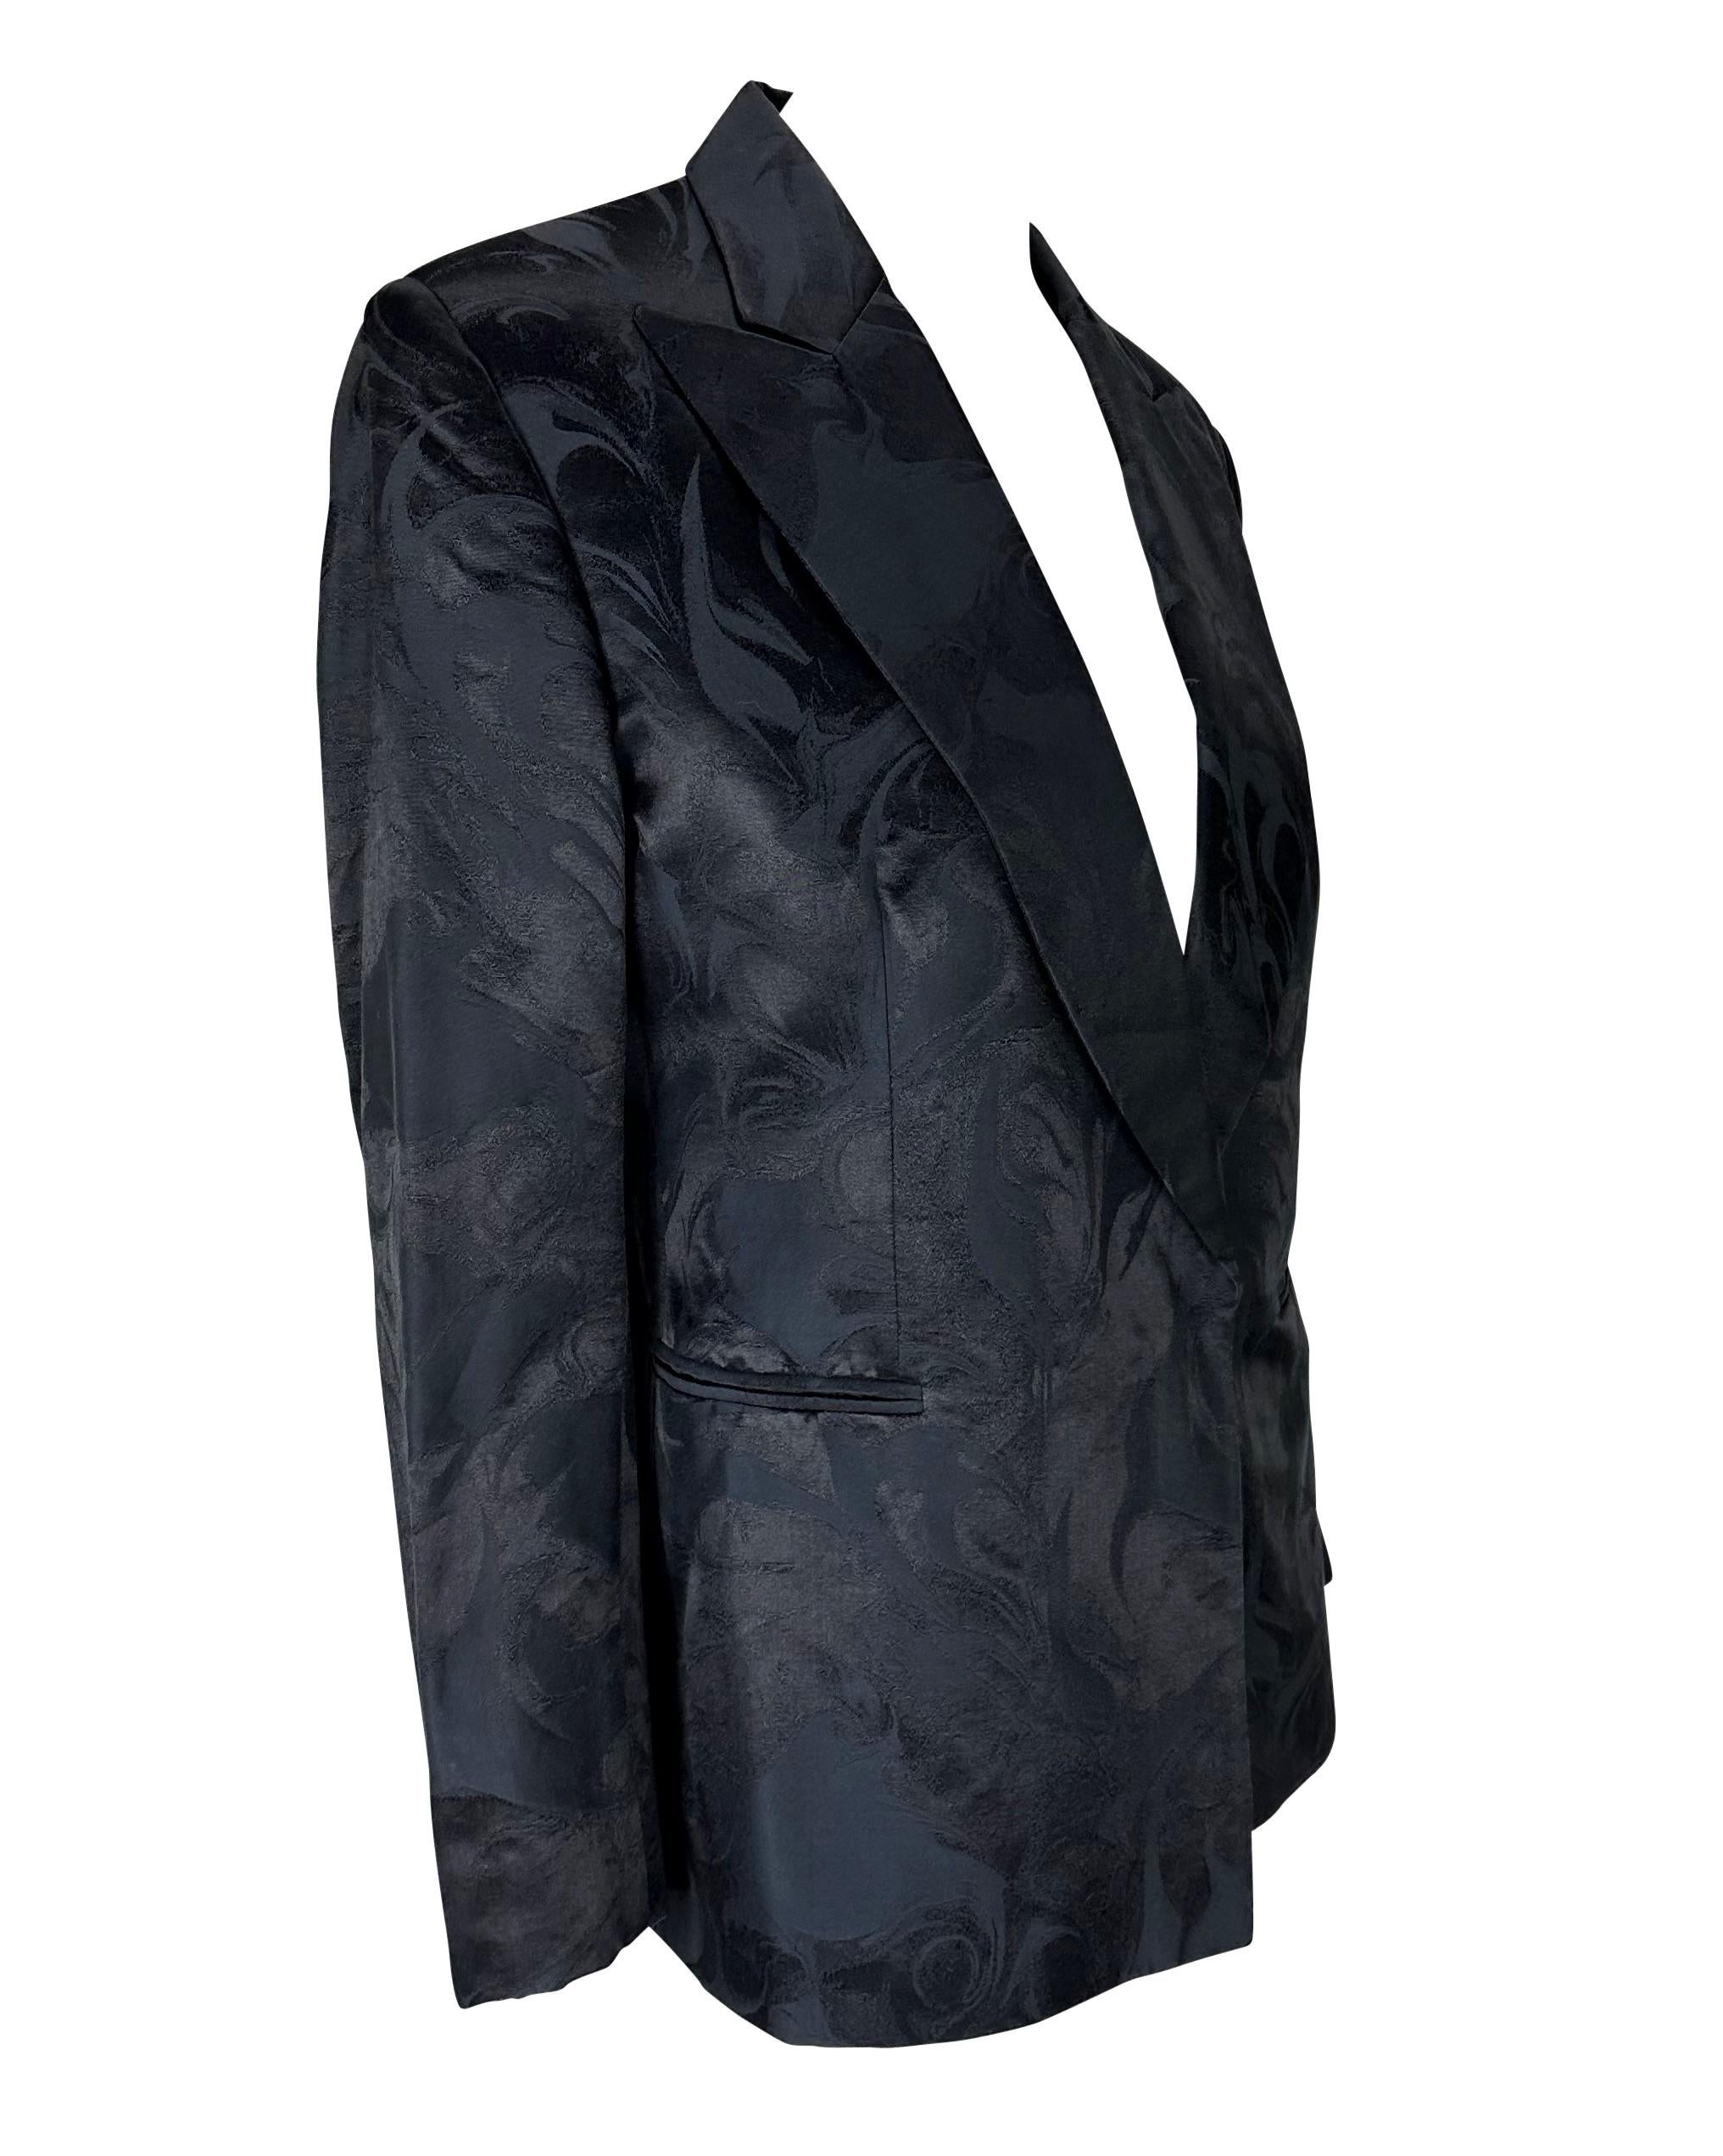 S/S 2001 Gucci by Tom Ford Magma Jacquard Navy Cotton Silk Blazer Jacket For Sale 2